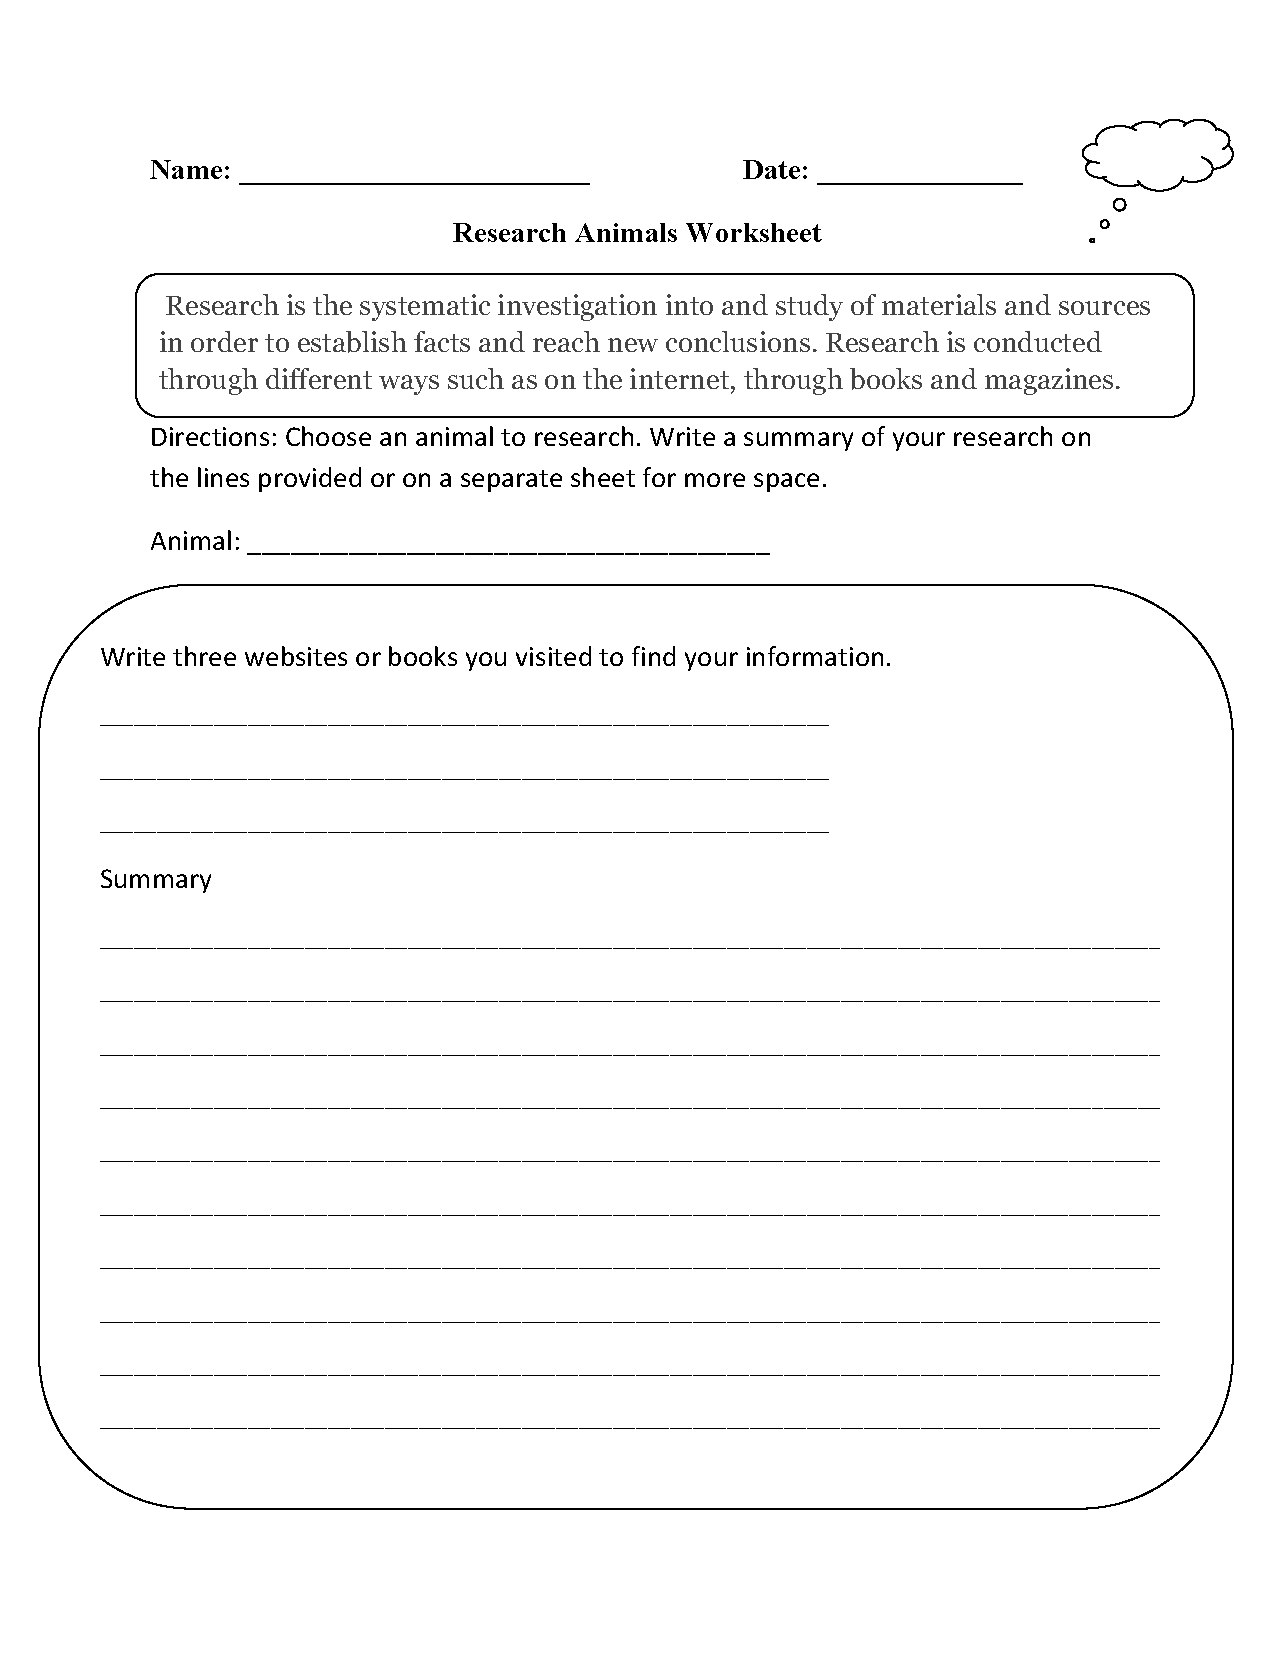 Research Animals<br>Worksheet